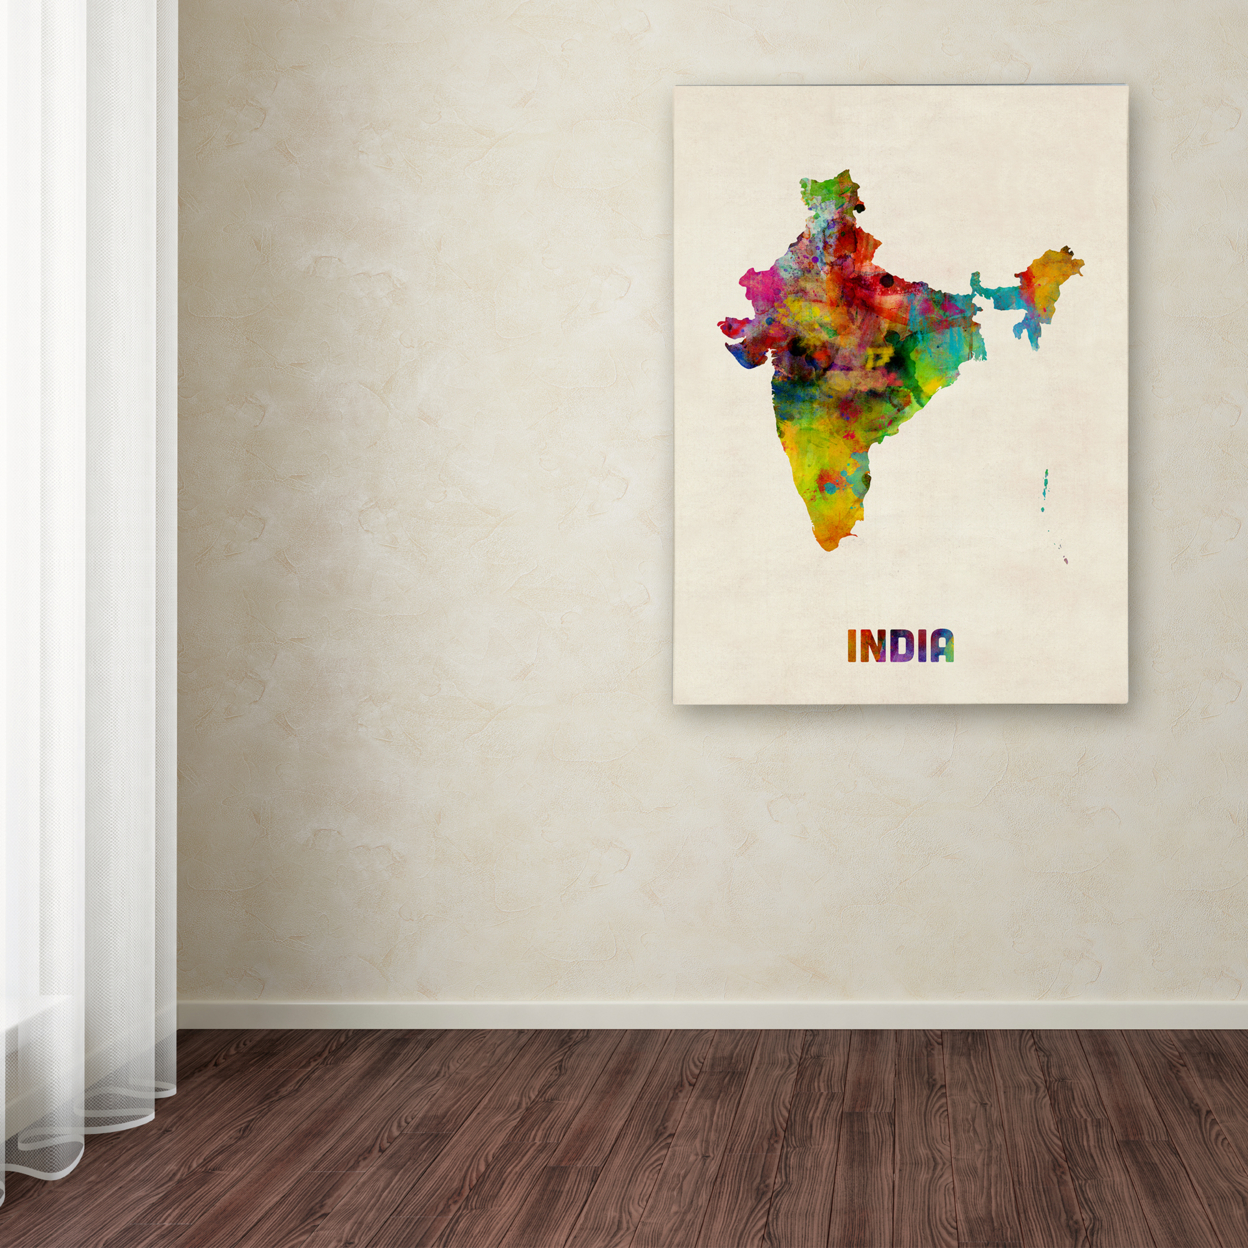 Michael Tompsett 'India Watercolor Map' Canvas Wall Art 35 X 47 Inches